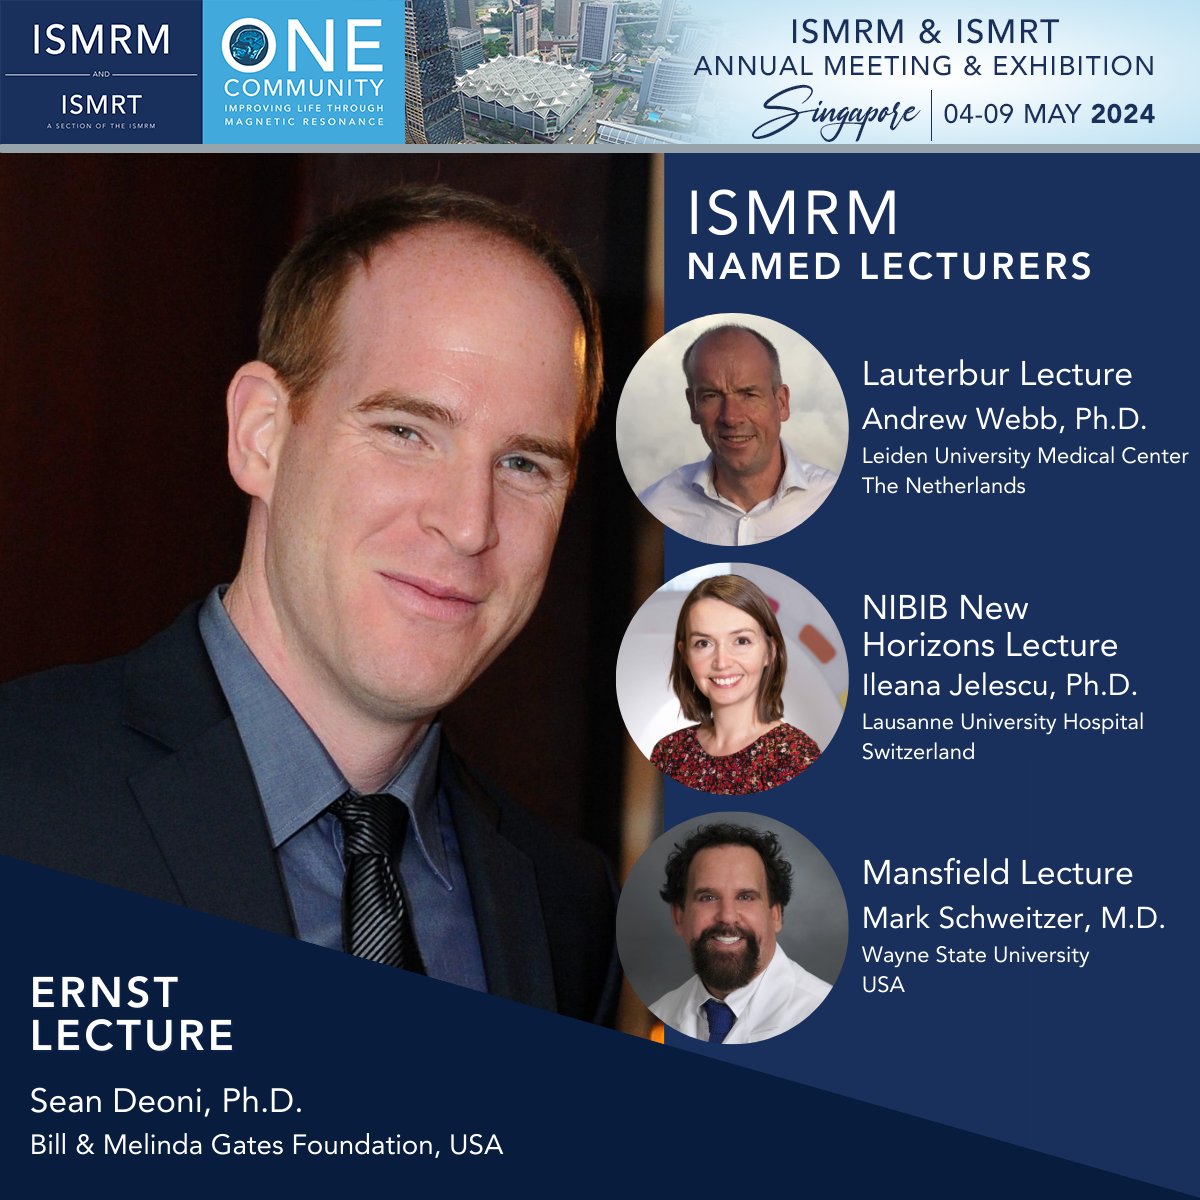 Thrilled to announce Sean Deoni, Ph.D. will present the Ernst Lecture, “Improving Newborn & Child Health in Low-Resource Settings: The Role & Challenges for Portable MRI” at the ISMRM & ISMRT Annual Meeting & Exhibition. Learn more: ow.ly/bEpM50RjuZY #ISMRM2024 #ISMRM